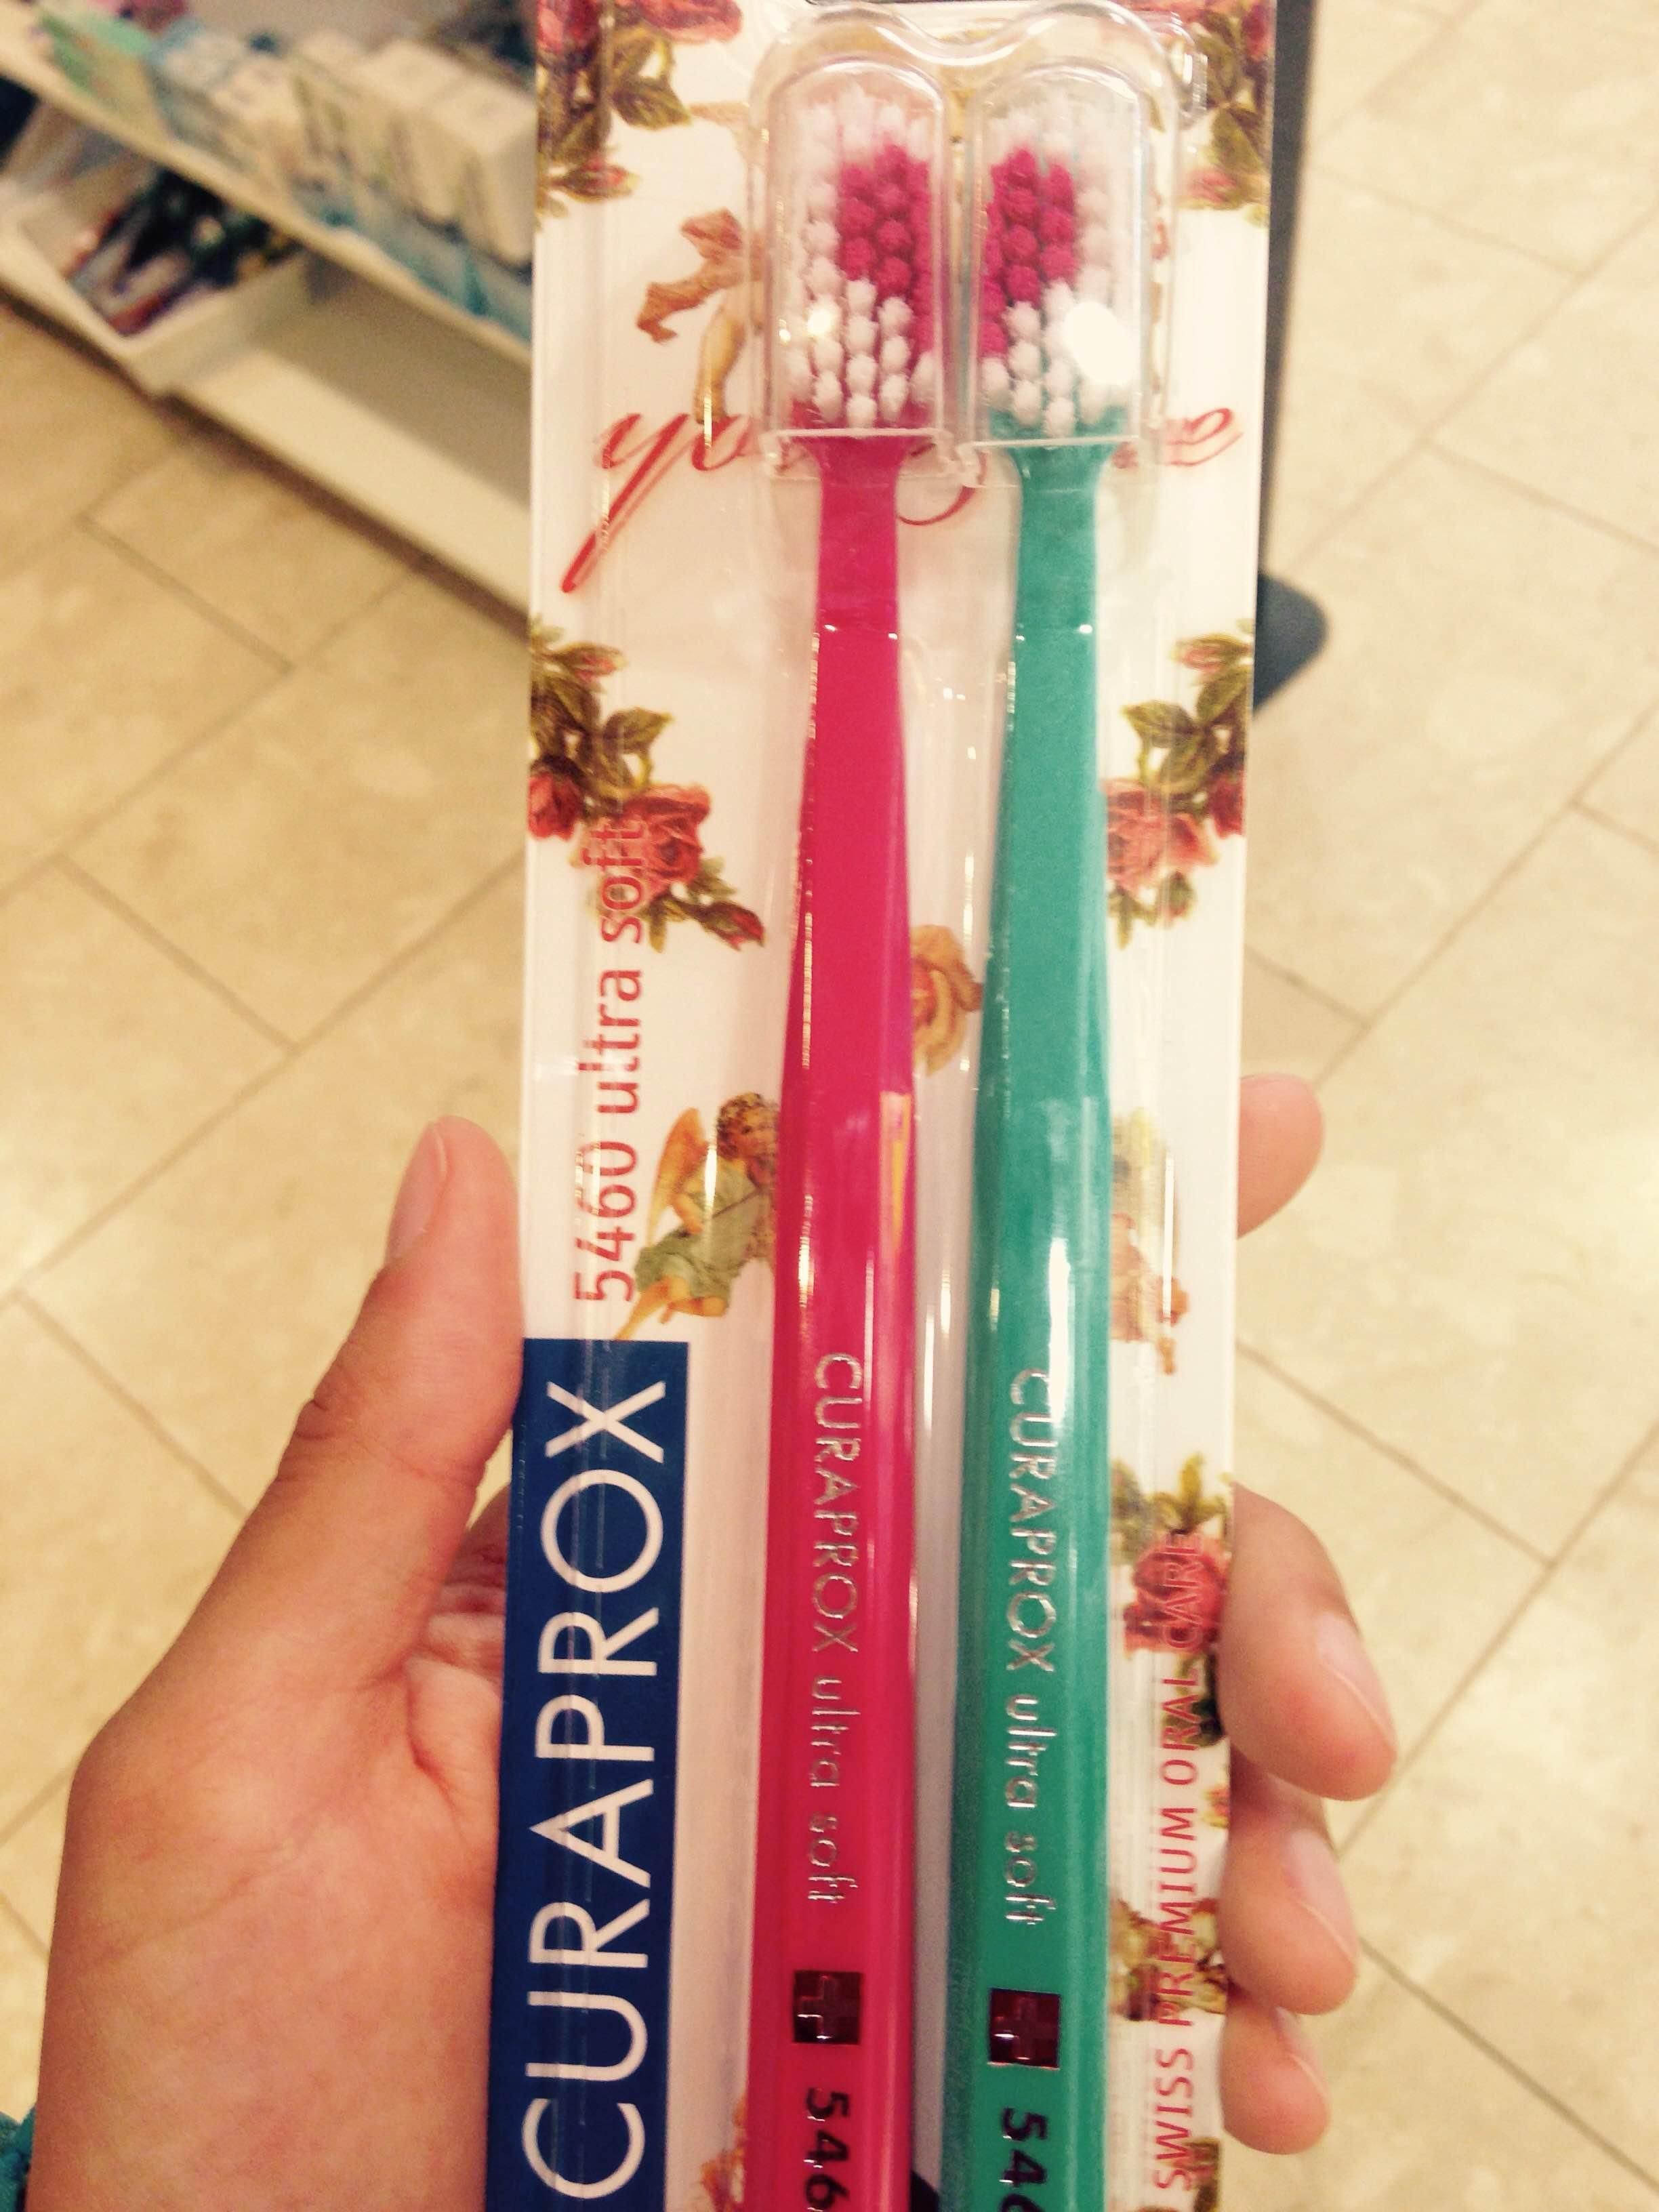 This pair of toothbrushes only makes sense when together